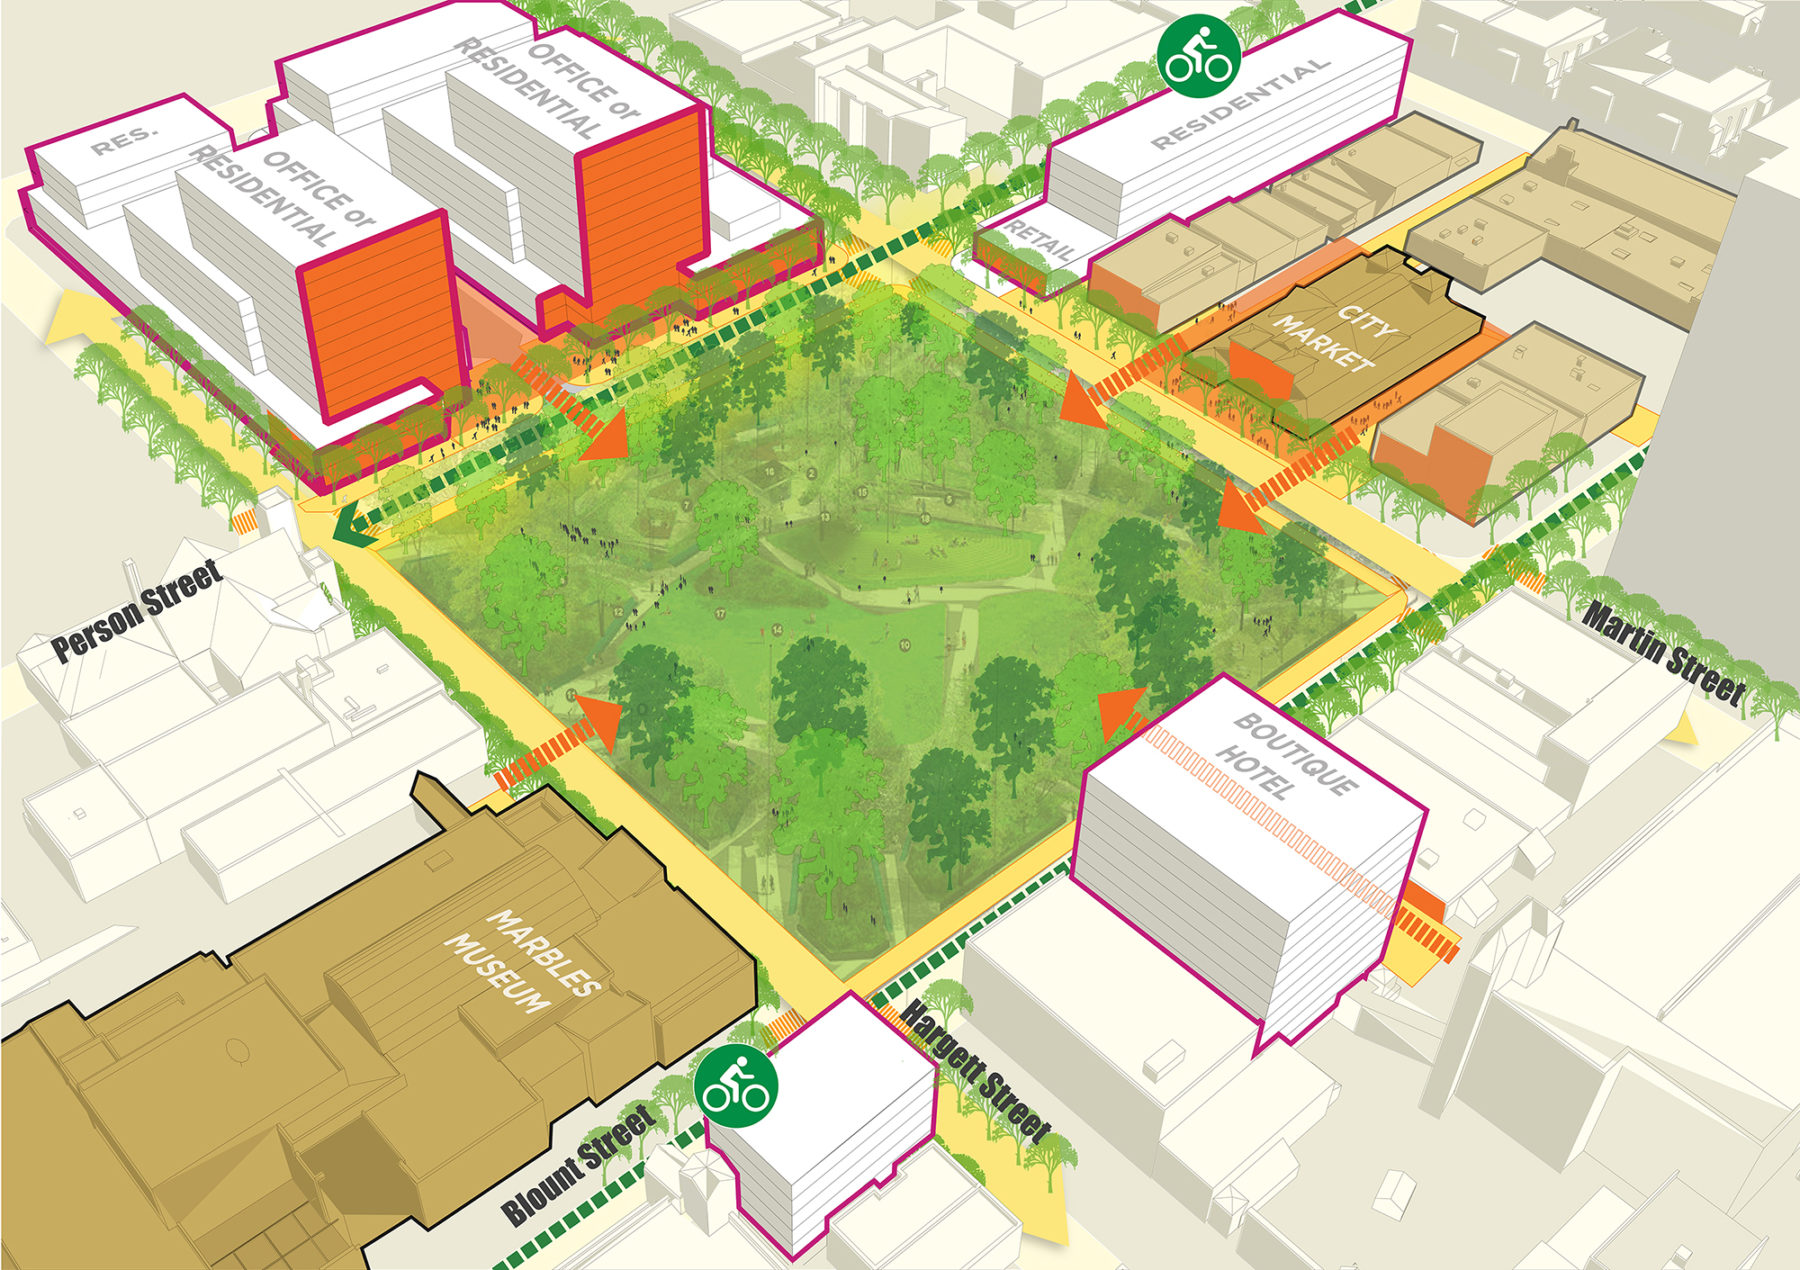 Site plan of downtown Raleigh with park in the middle surrounded by buildings